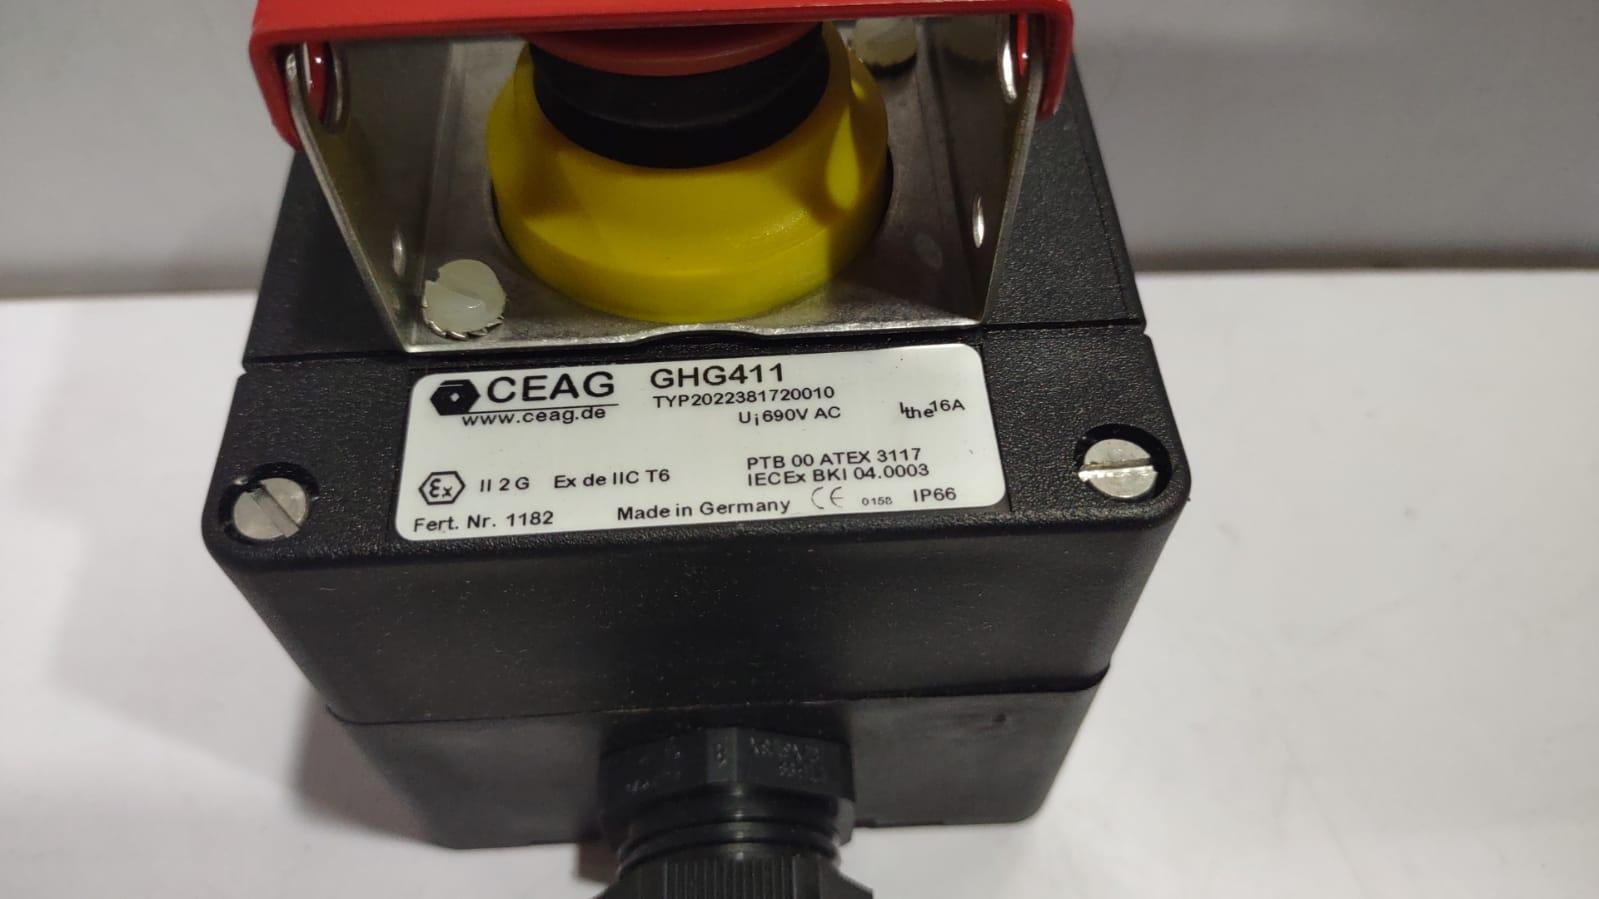 Cooper Crouse Hinds CEAG GHG411 2022381720010 Control Unit